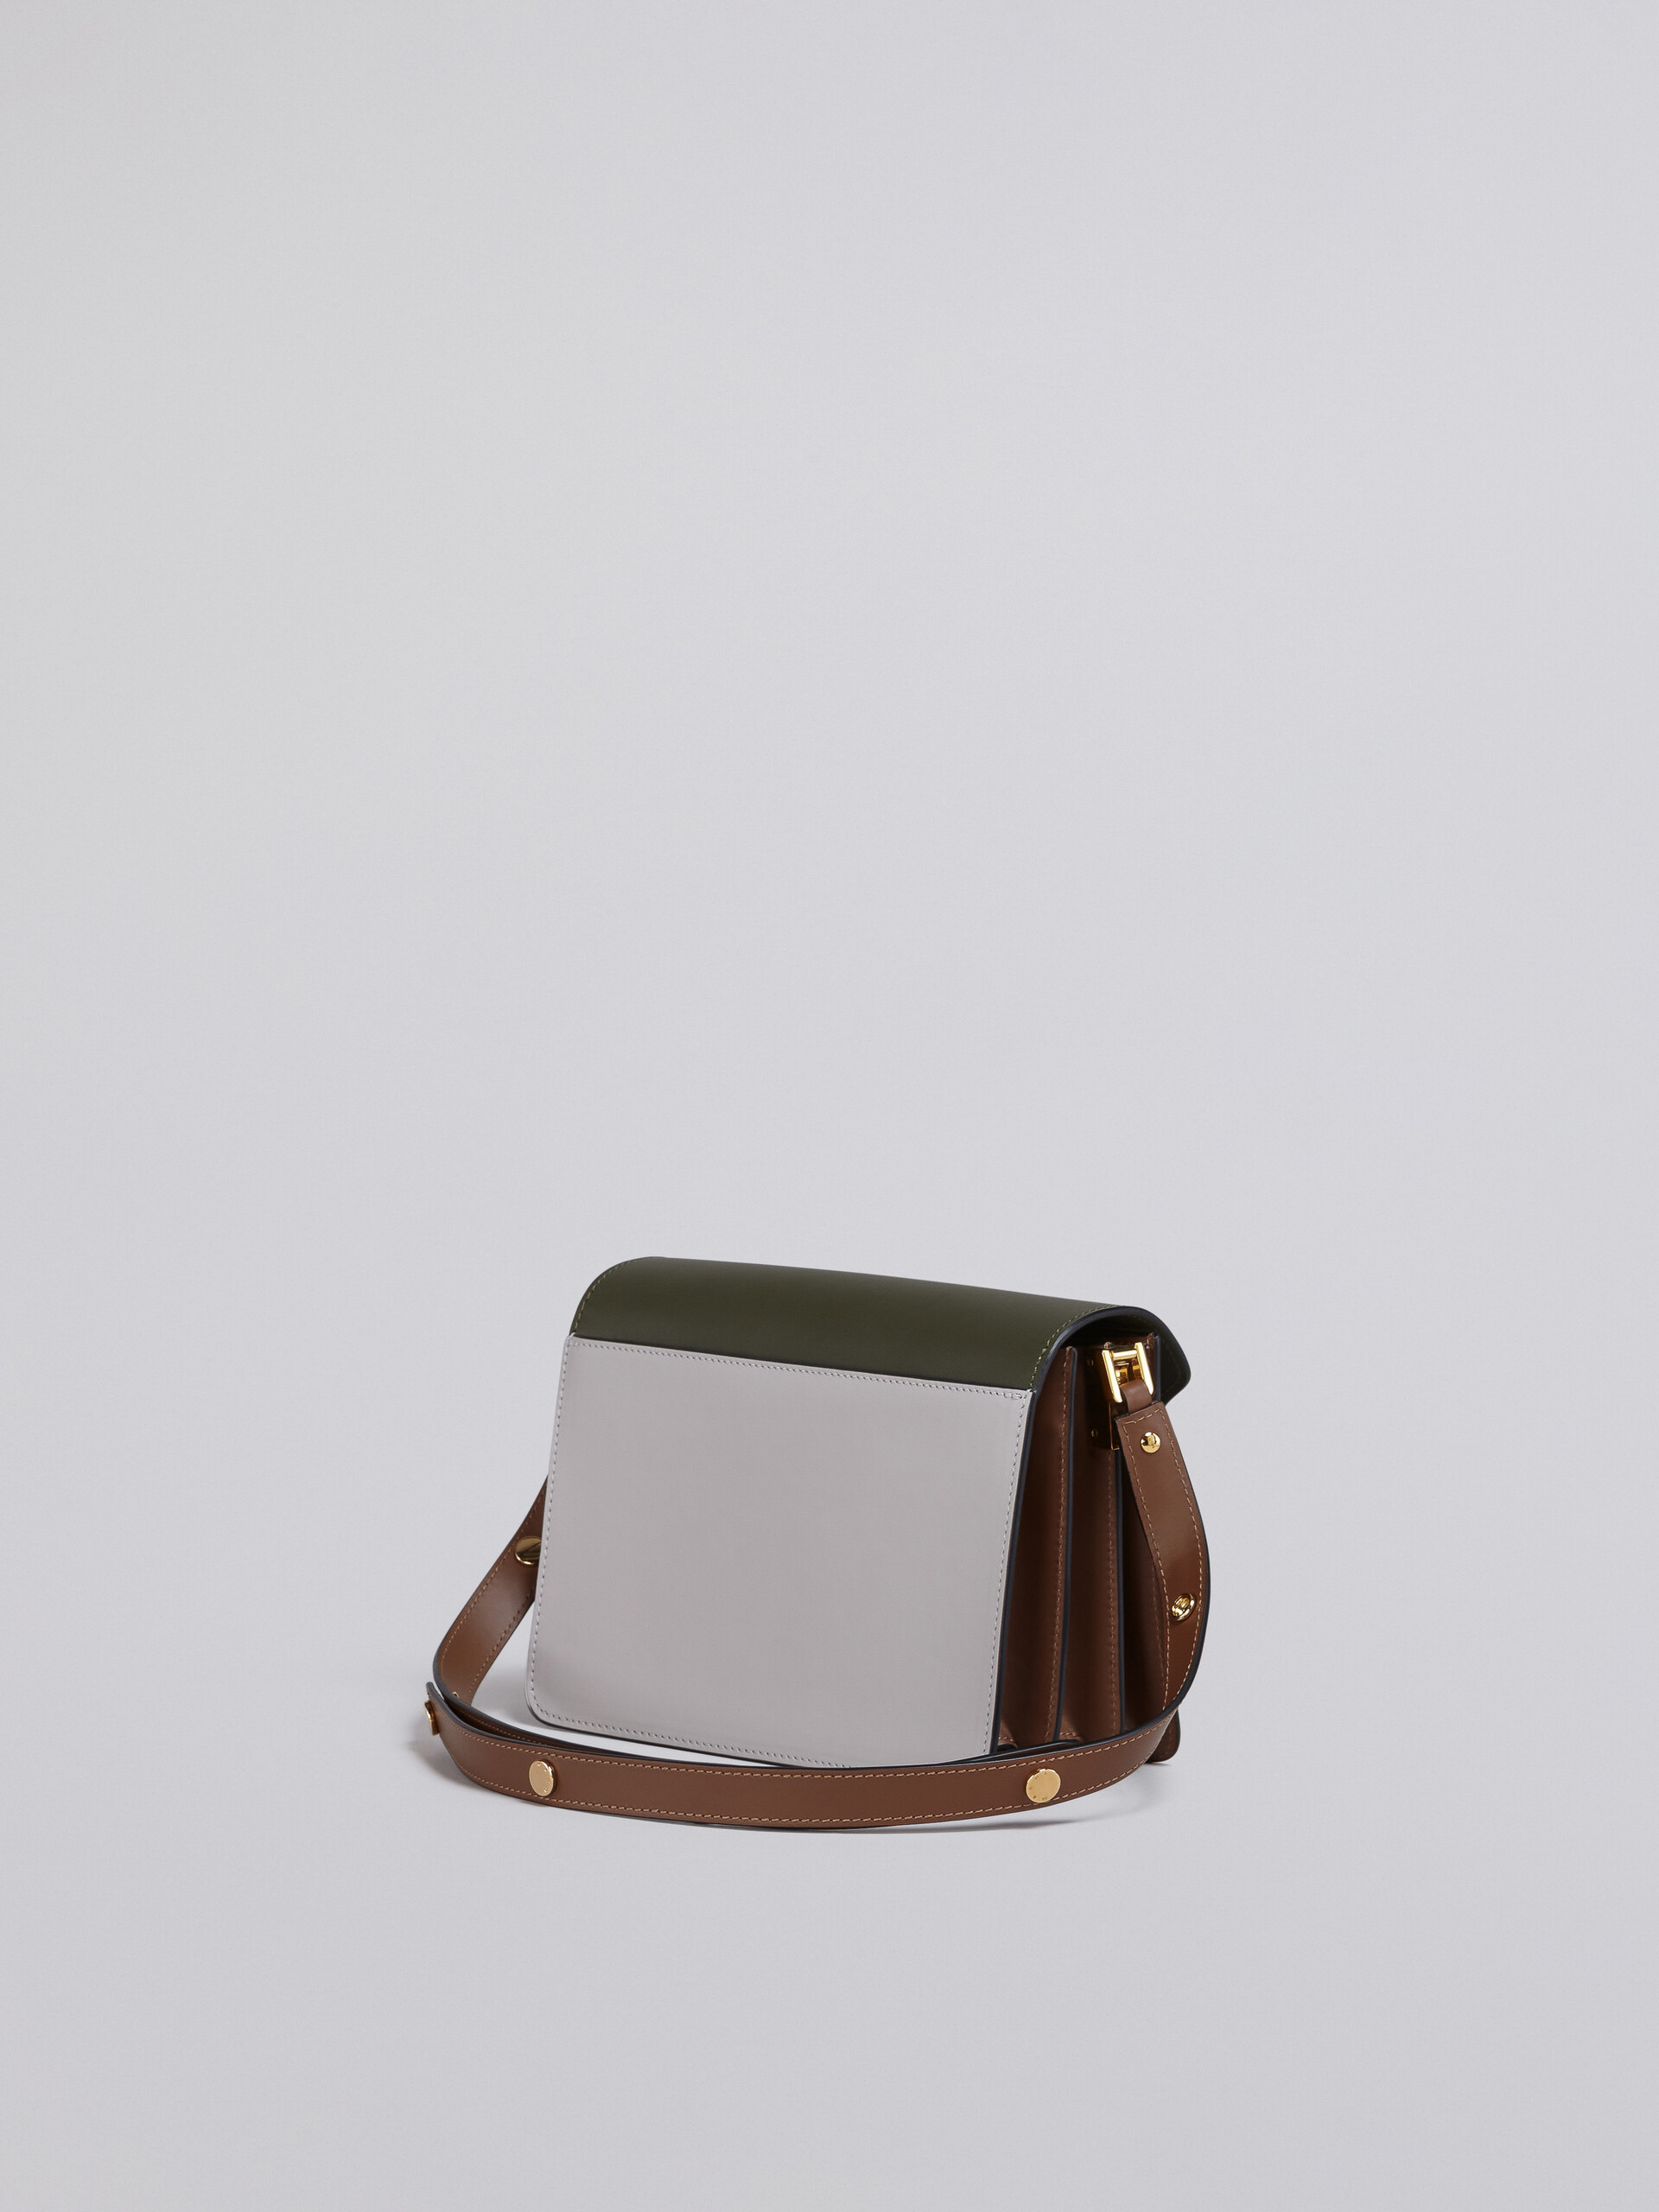 TRUNK medium bag in green grey and brown leather - Shoulder Bags - Image 2